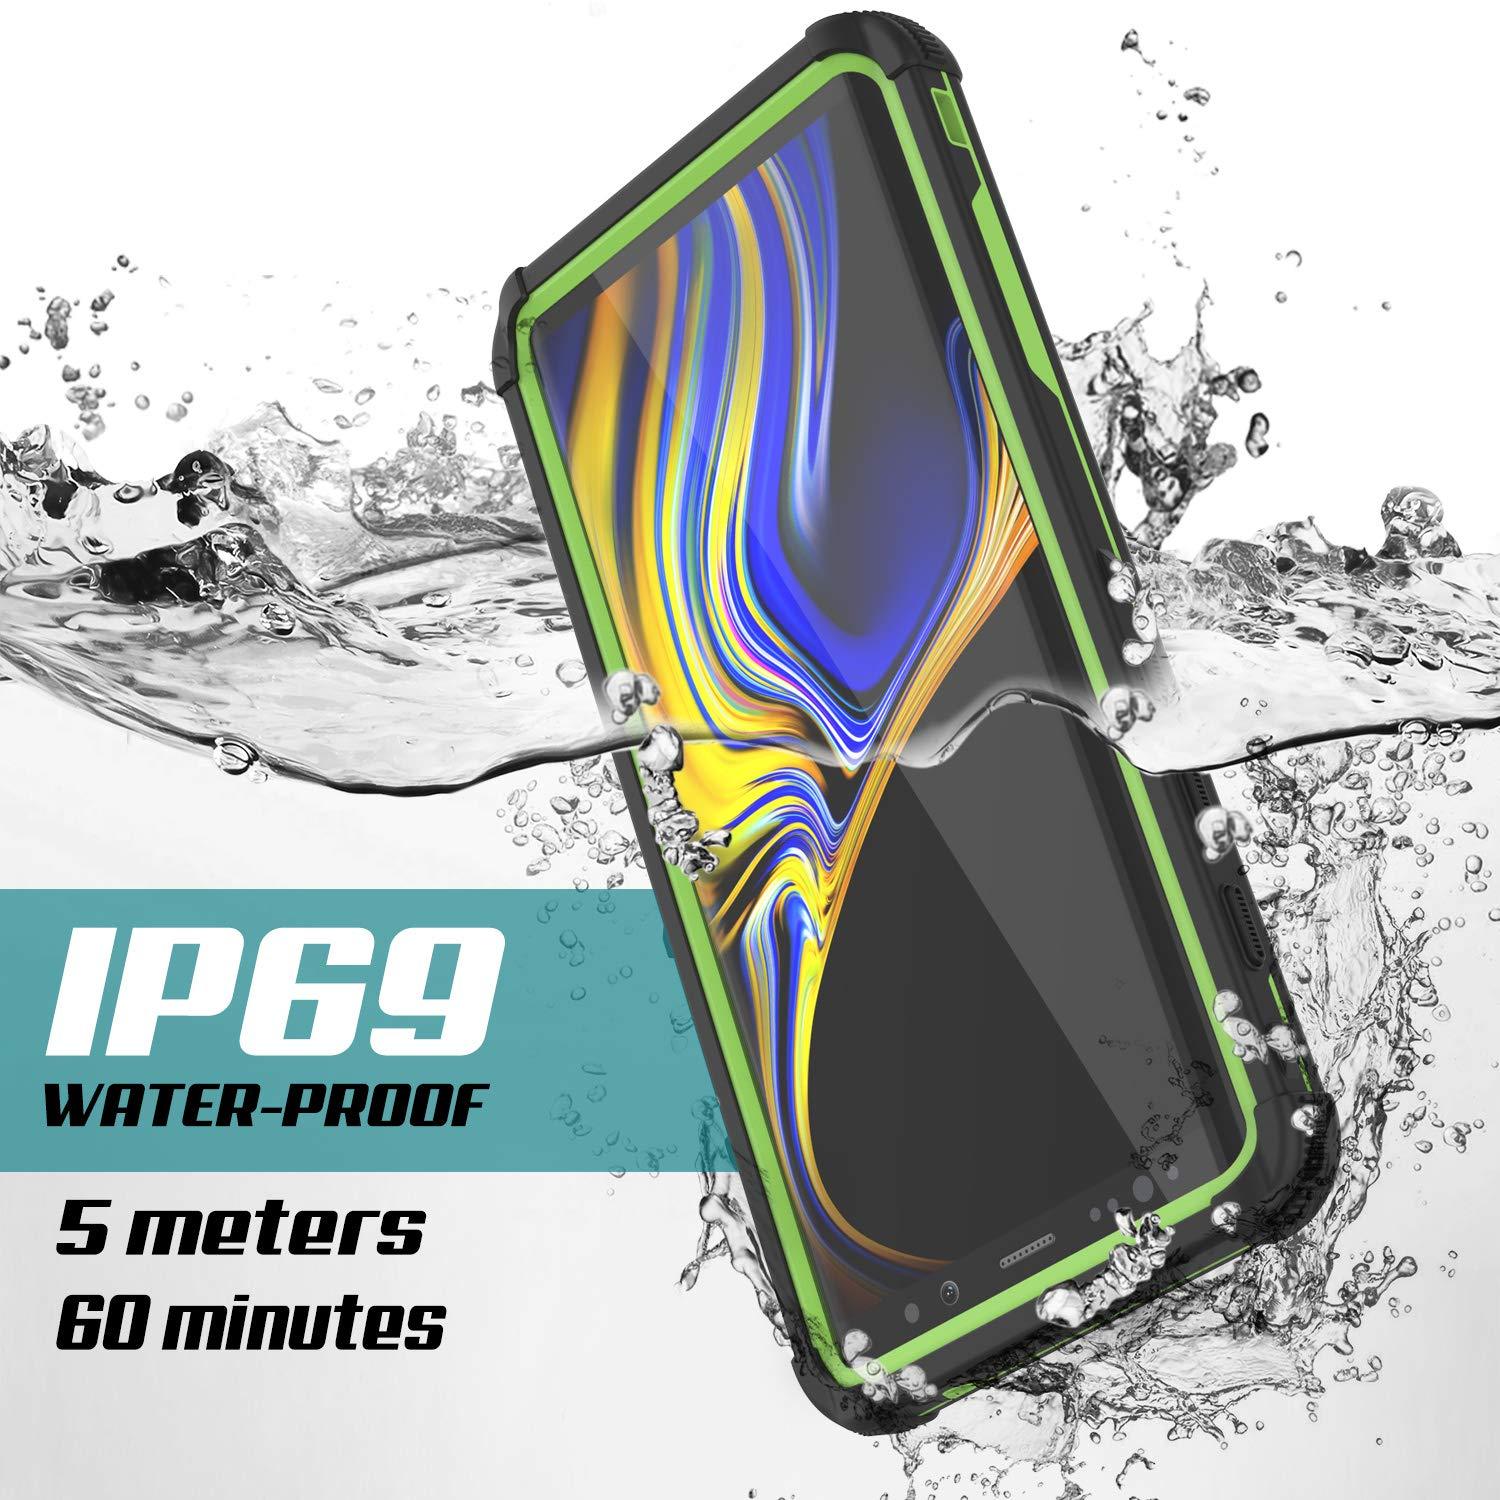 Punkcase Galaxy Note 9 Waterproof Case [Navy Seal Extreme Series] Armor Cover W/ Built In Screen Protector [Light Green]